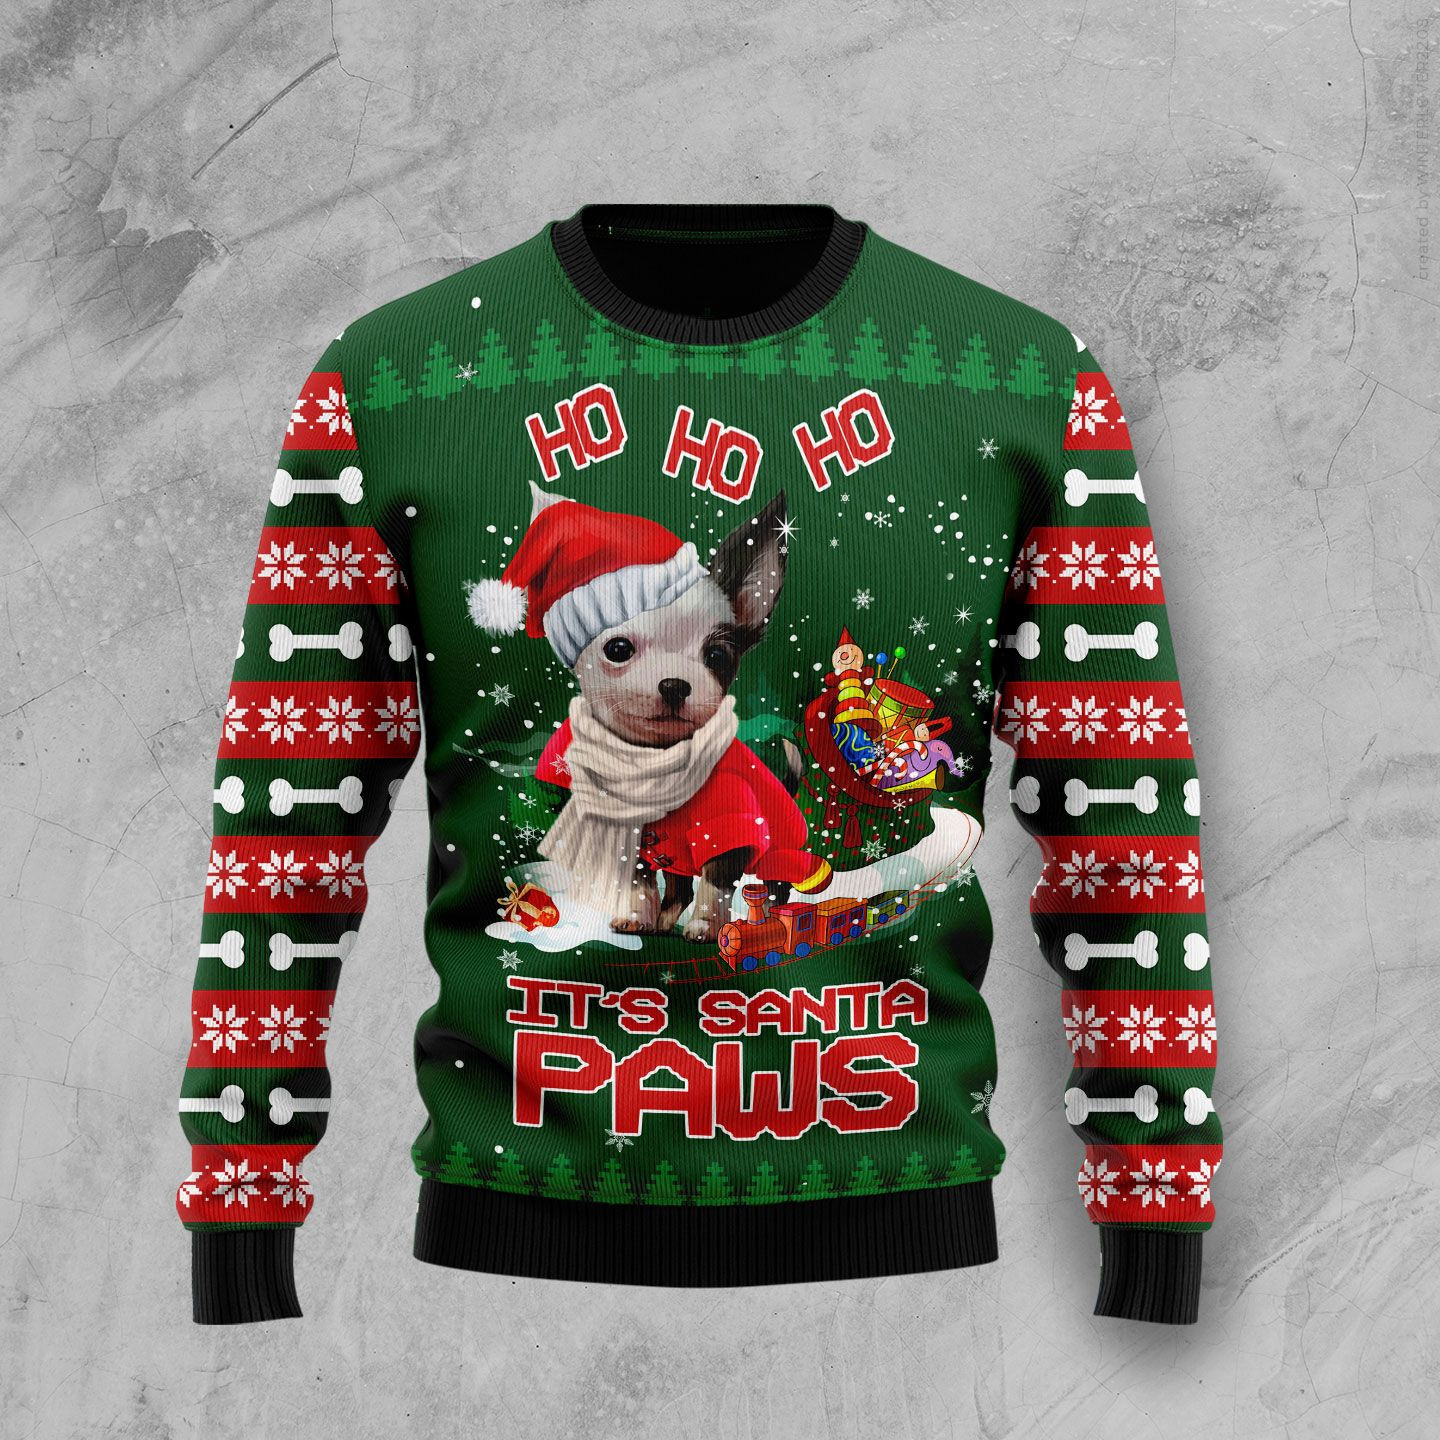 Chihuahua Santa Paws Ugly Christmas Sweater Ugly Sweater For Men Women